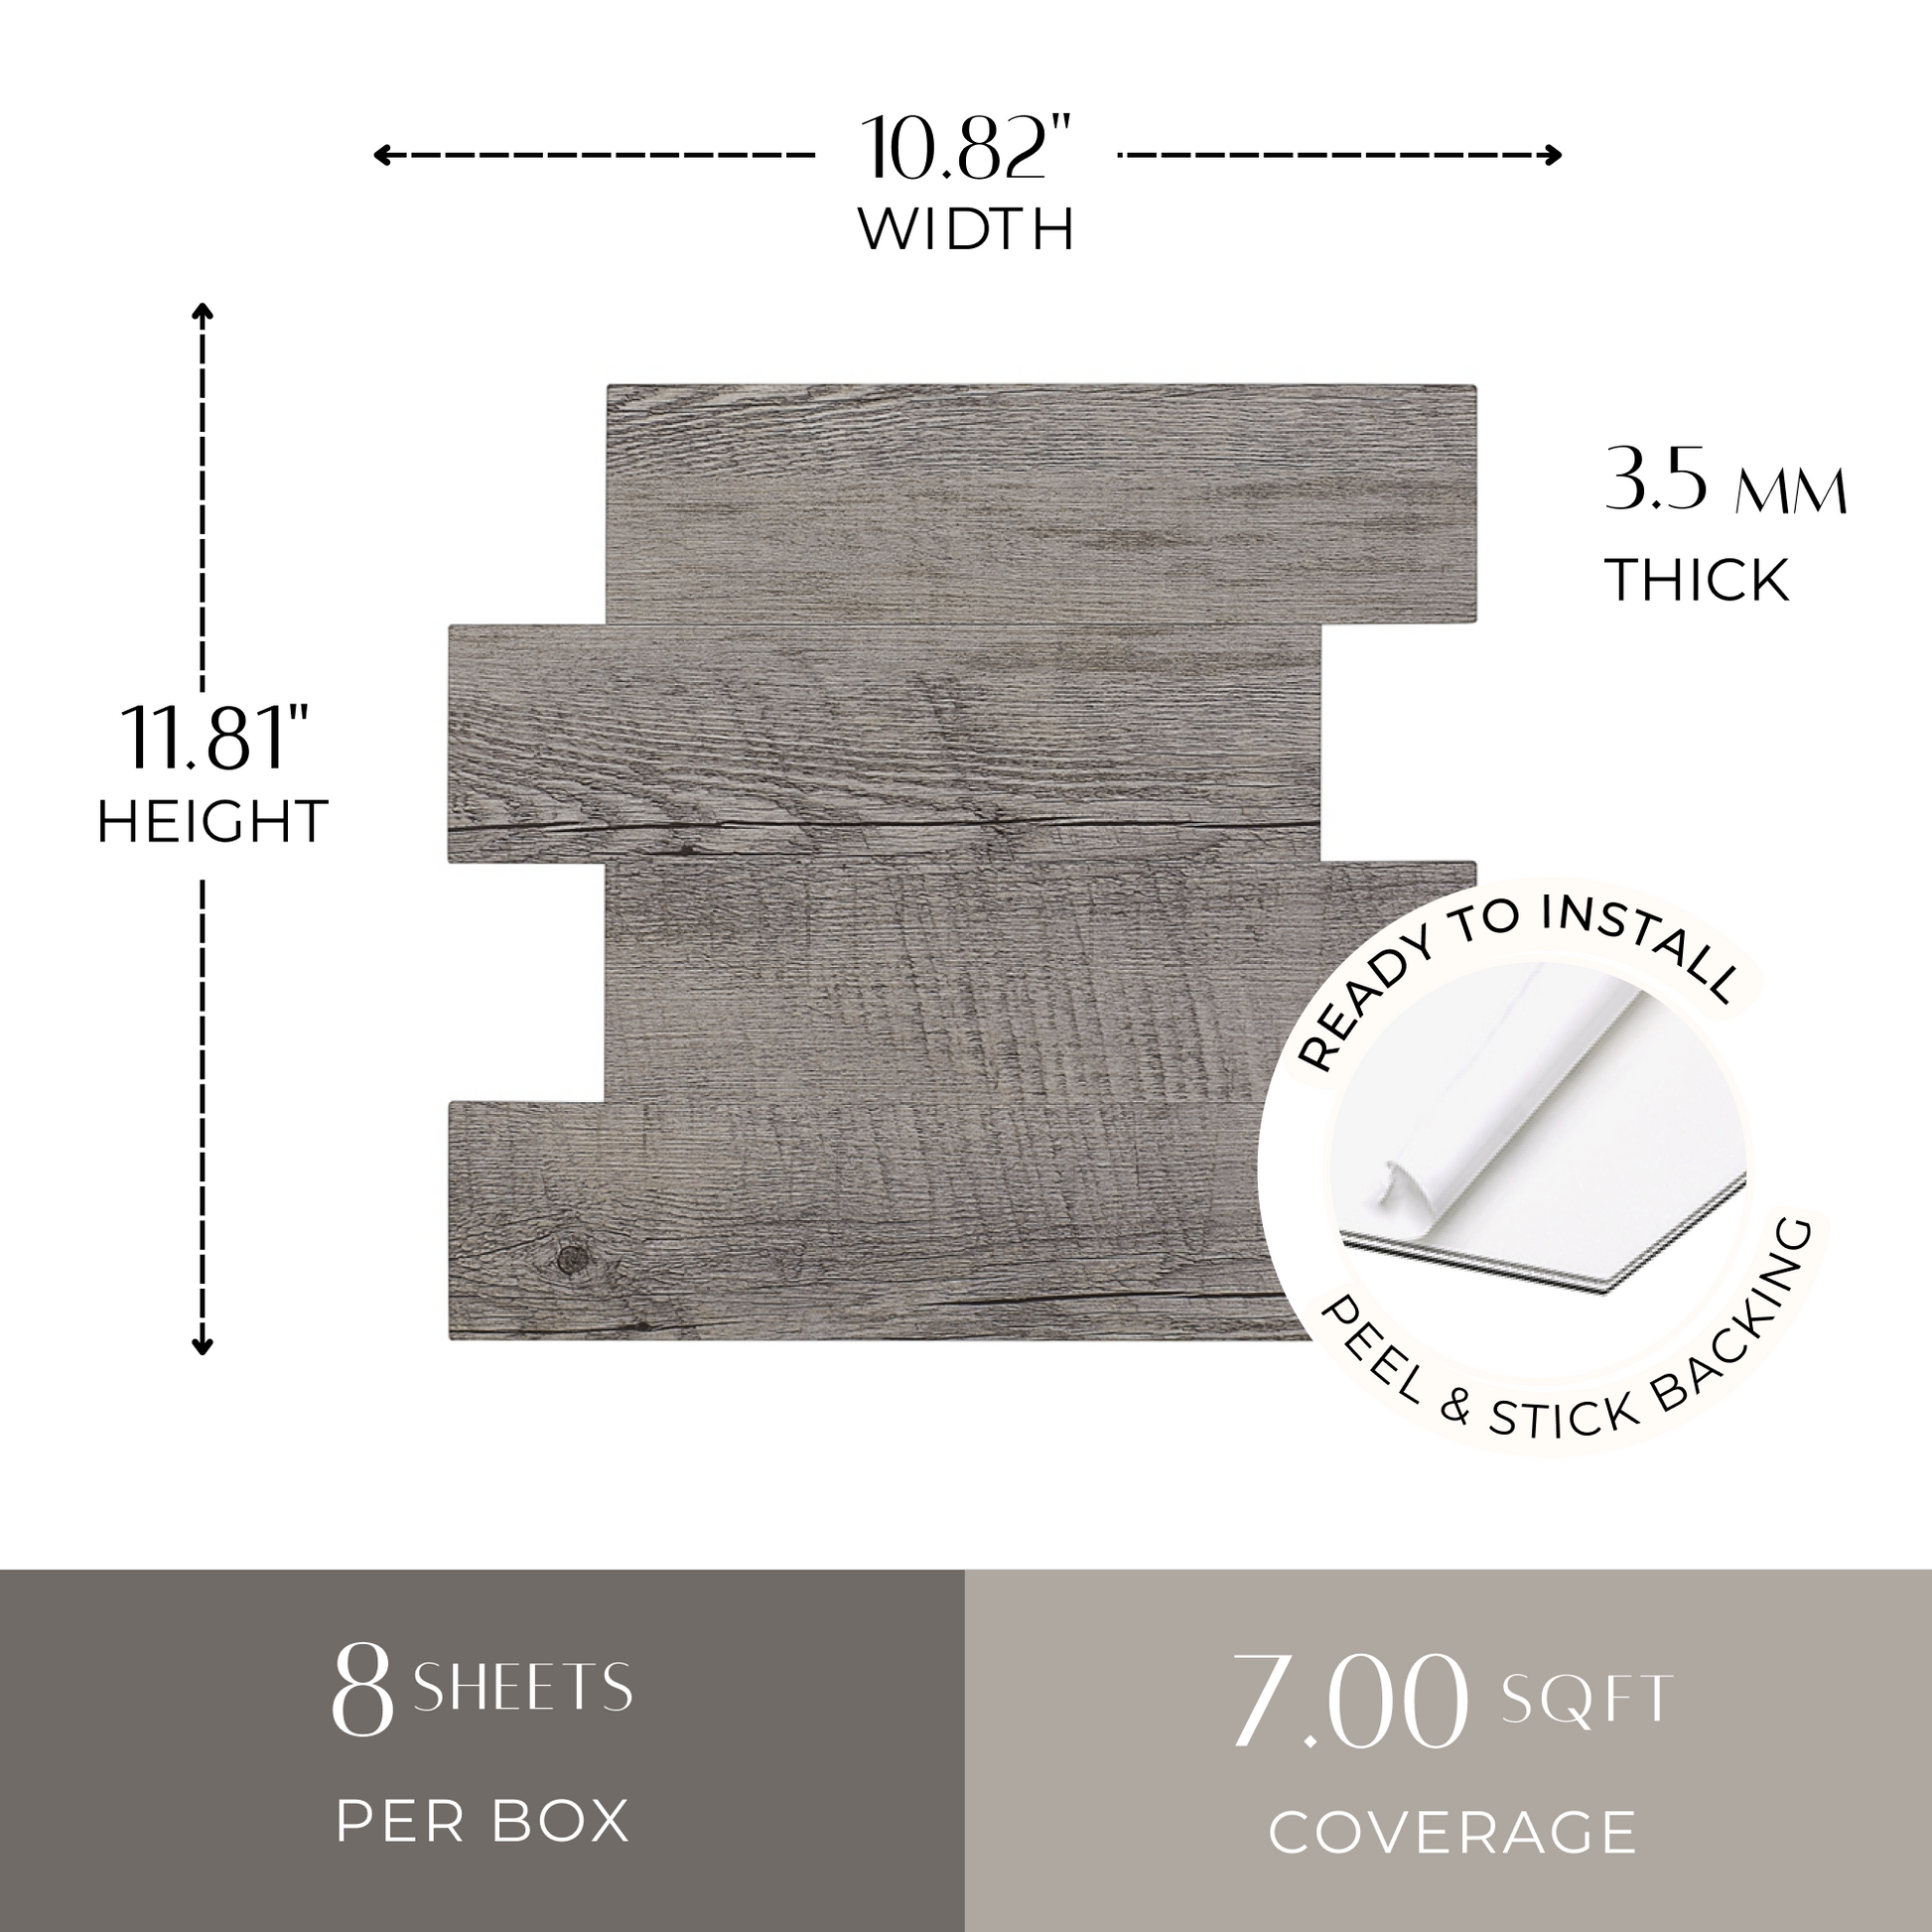 Backings and Pads - Creative Flooring Indianapolis